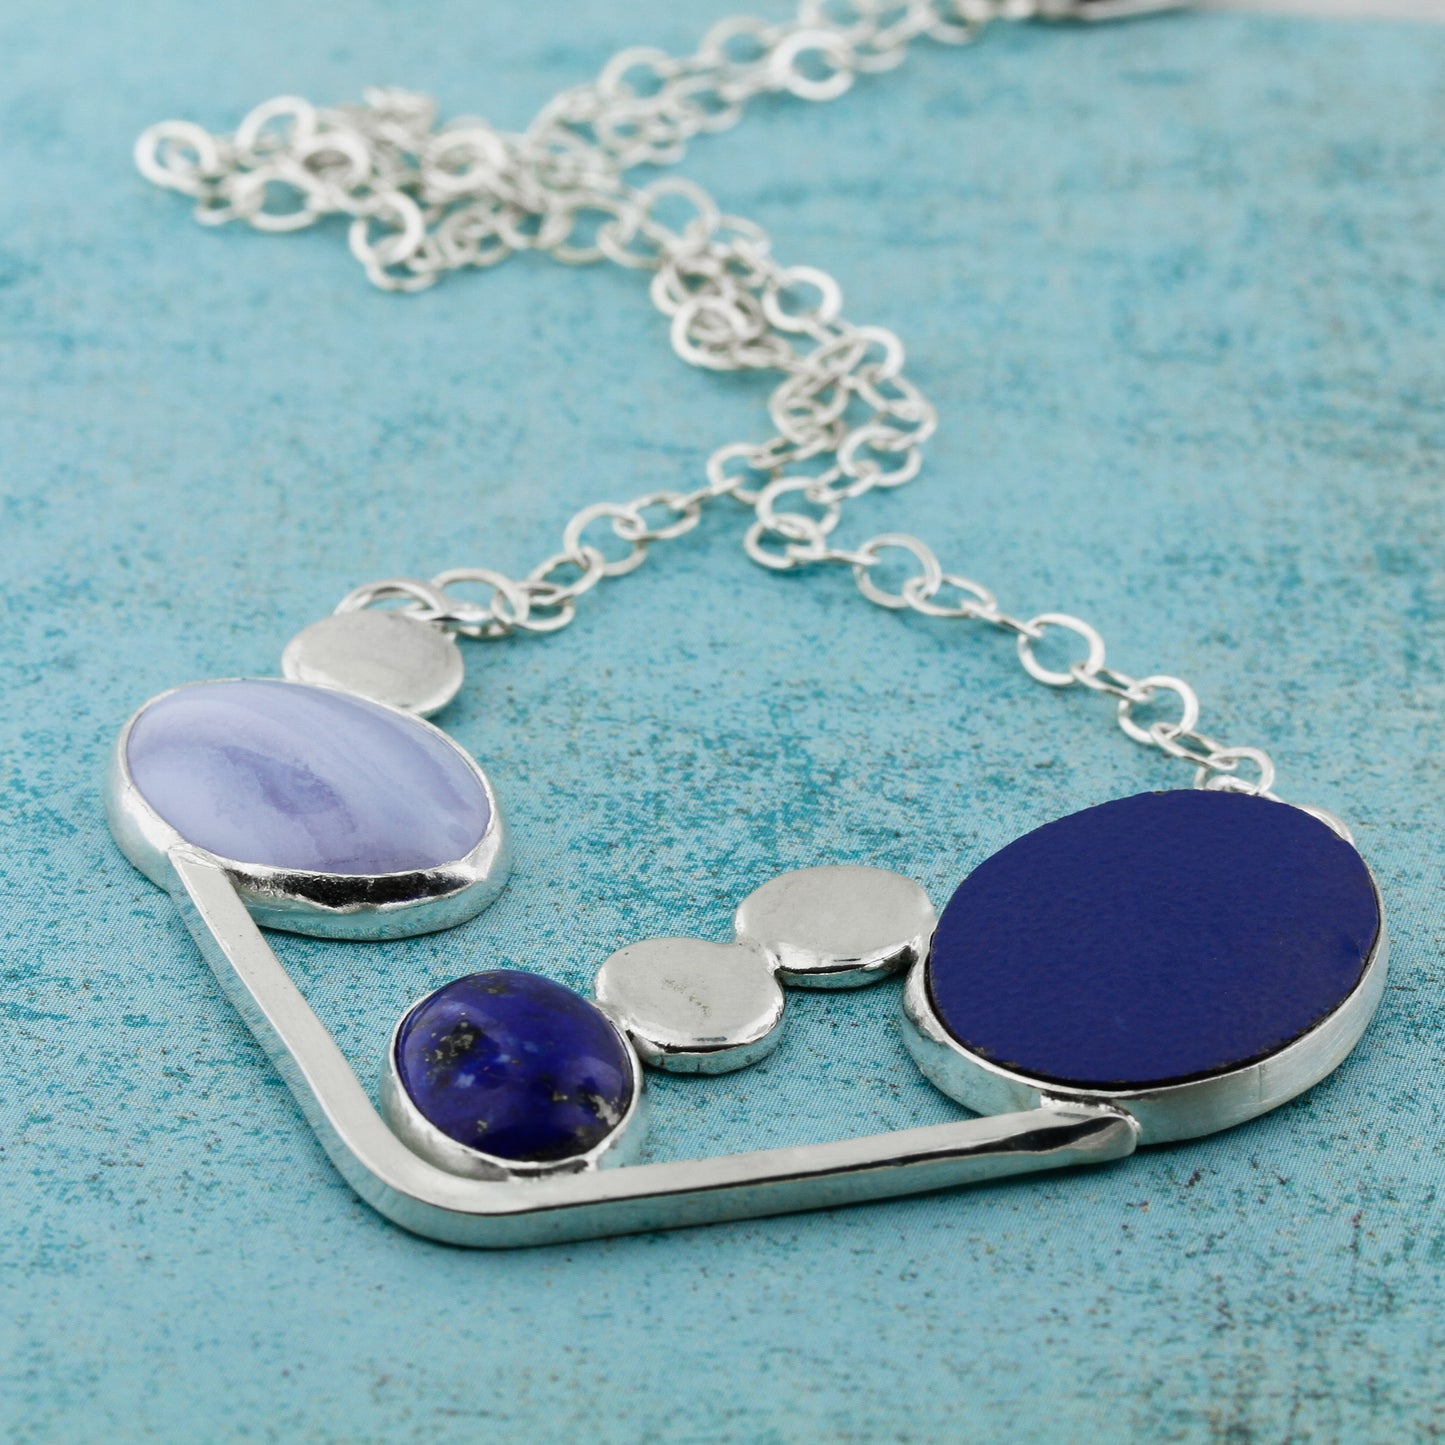 Beautiful abstract modernist necklace in blues featuring blue lace agate, lapis lazuli and laminate on wood.